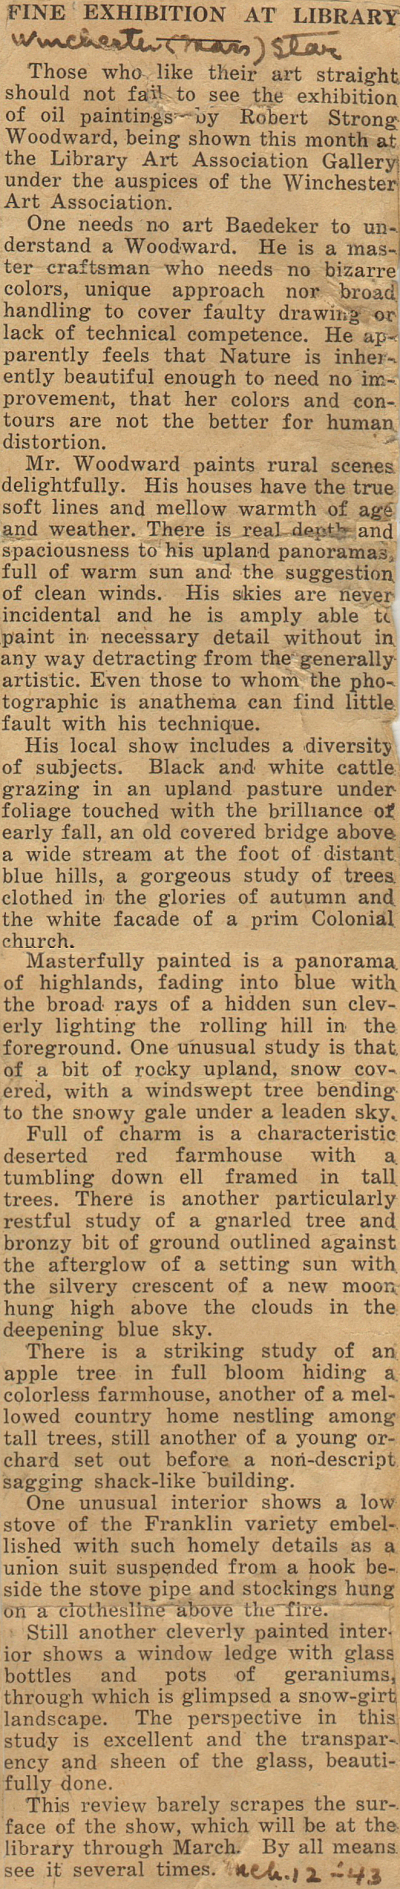 Article in Winchester Star,  March 12, 194 